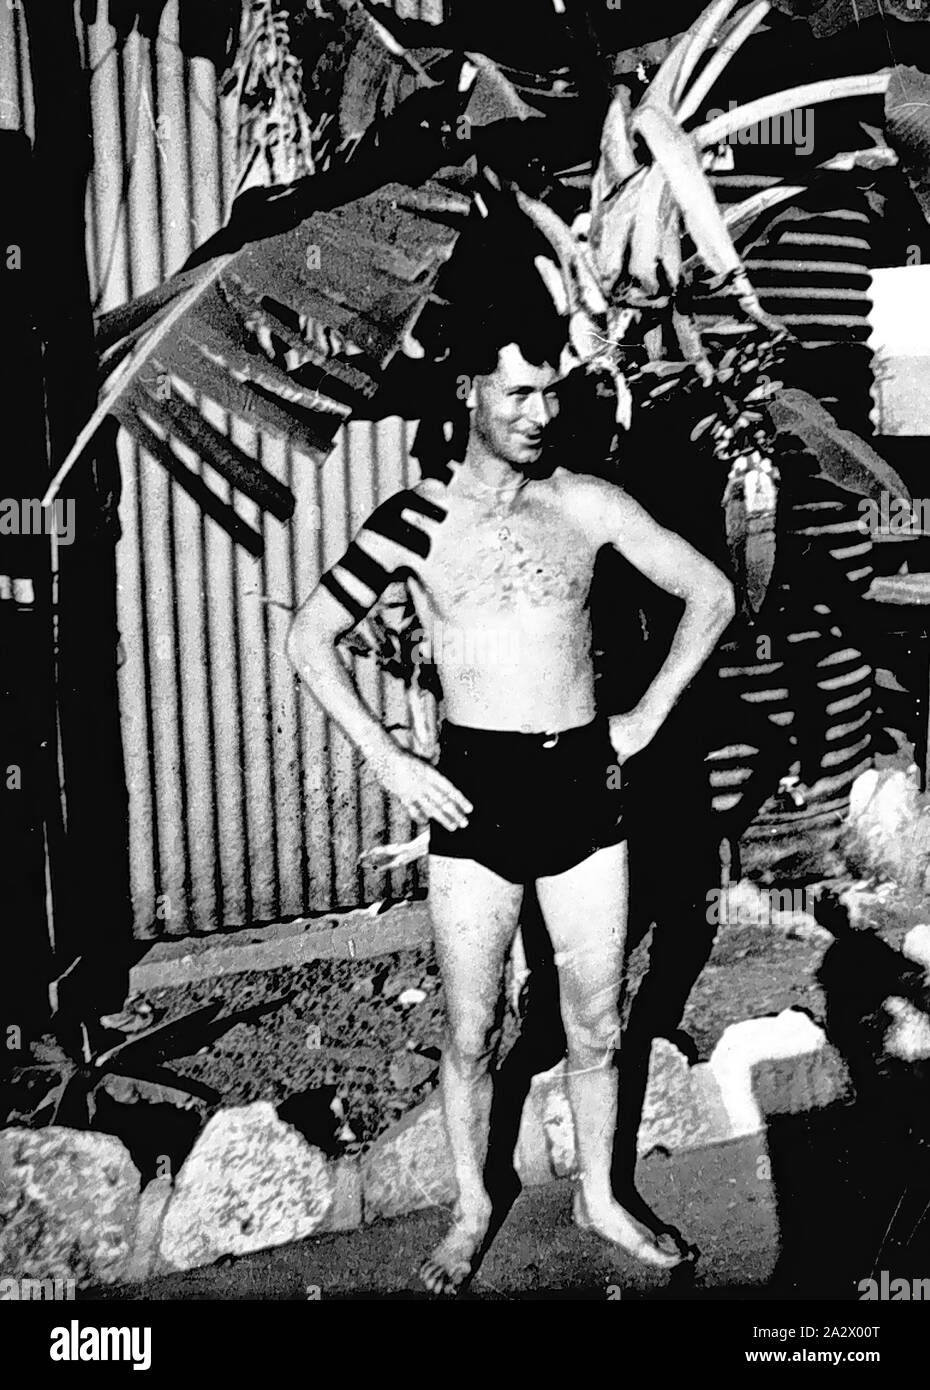 Negative - Picnic Cove, Northern Territory, Oct 1944, A man in swimming costume at the army camp of the Australian Army Searchlights 65th Battery. He is standing under a banana tree and there is a corrugated iron building behind him Stock Photo